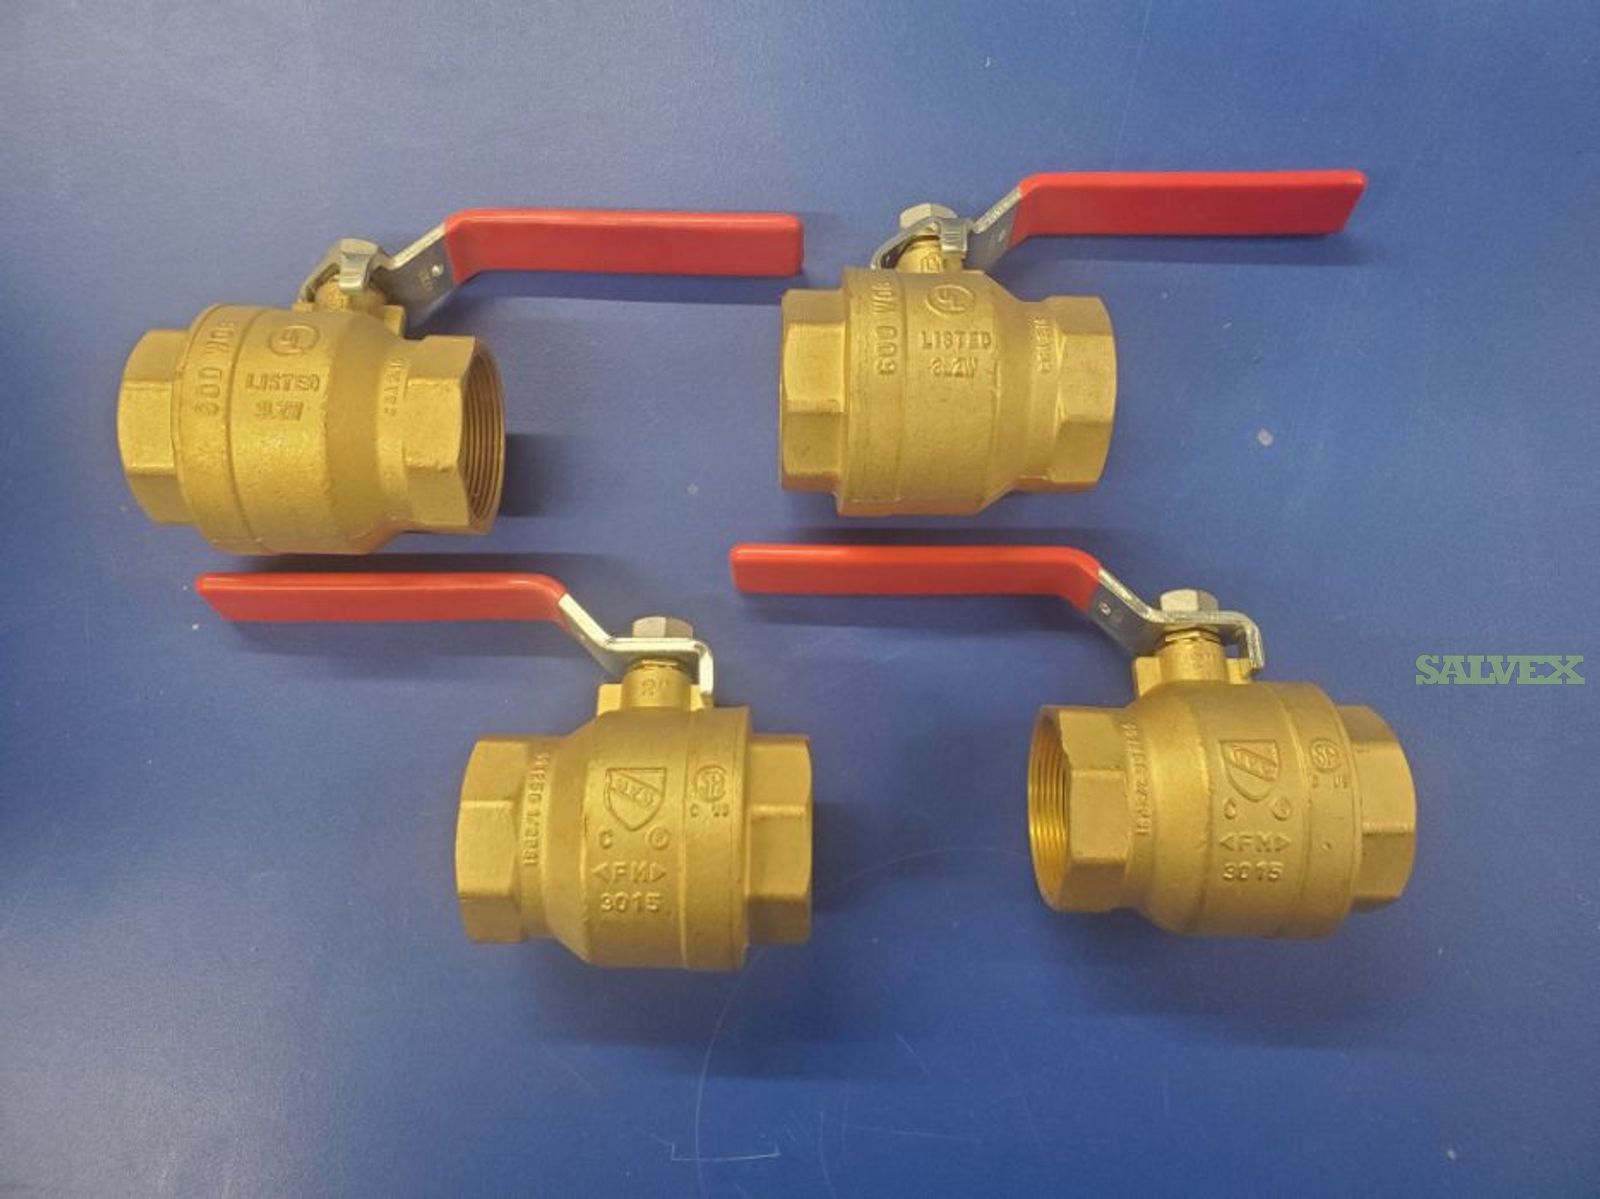 Tyco, Eaton and Space Age Valve/Curbstop (77 Units)